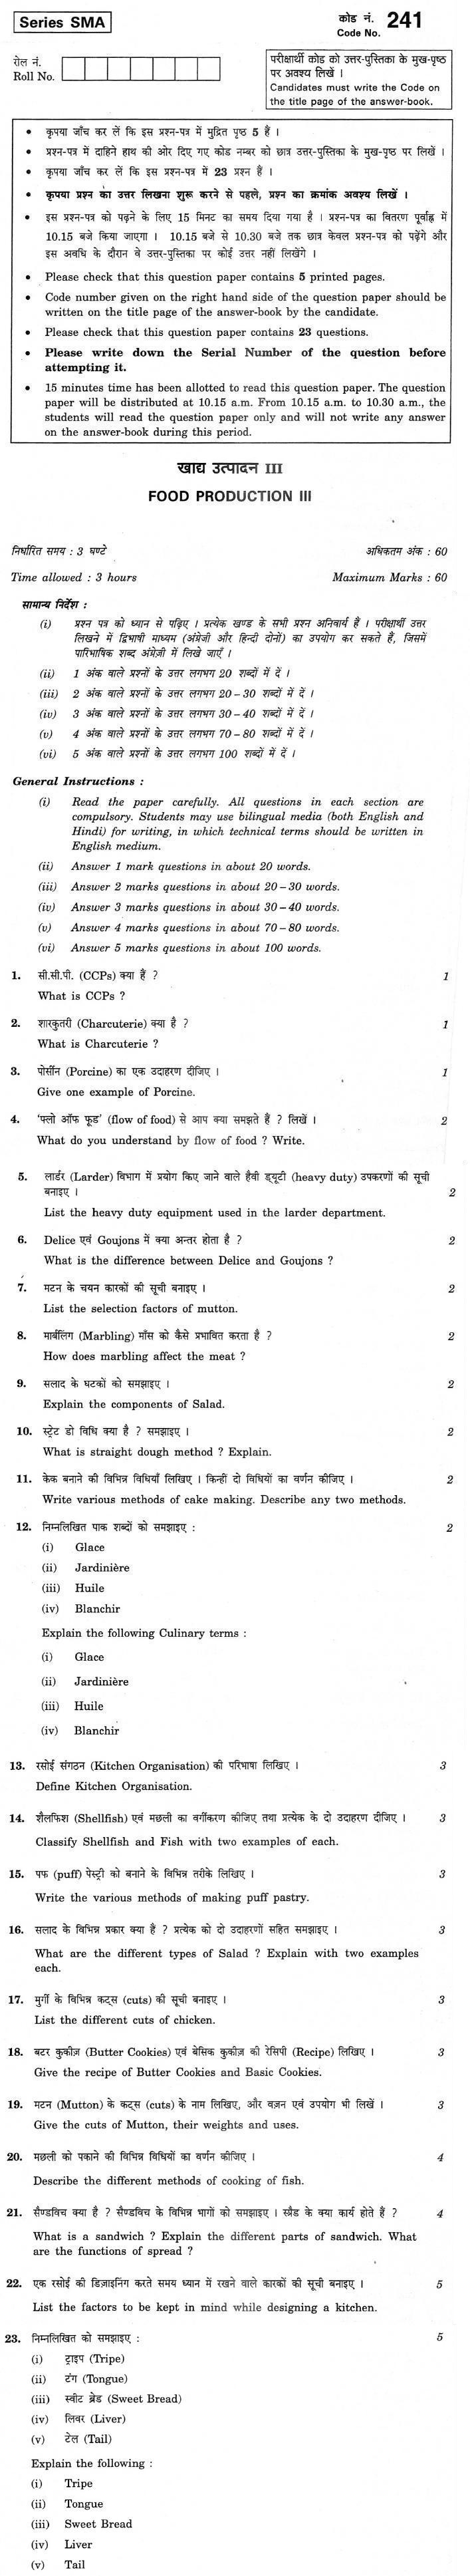 CBSE Class XII Previous Year Question Paper 2012 Food Production